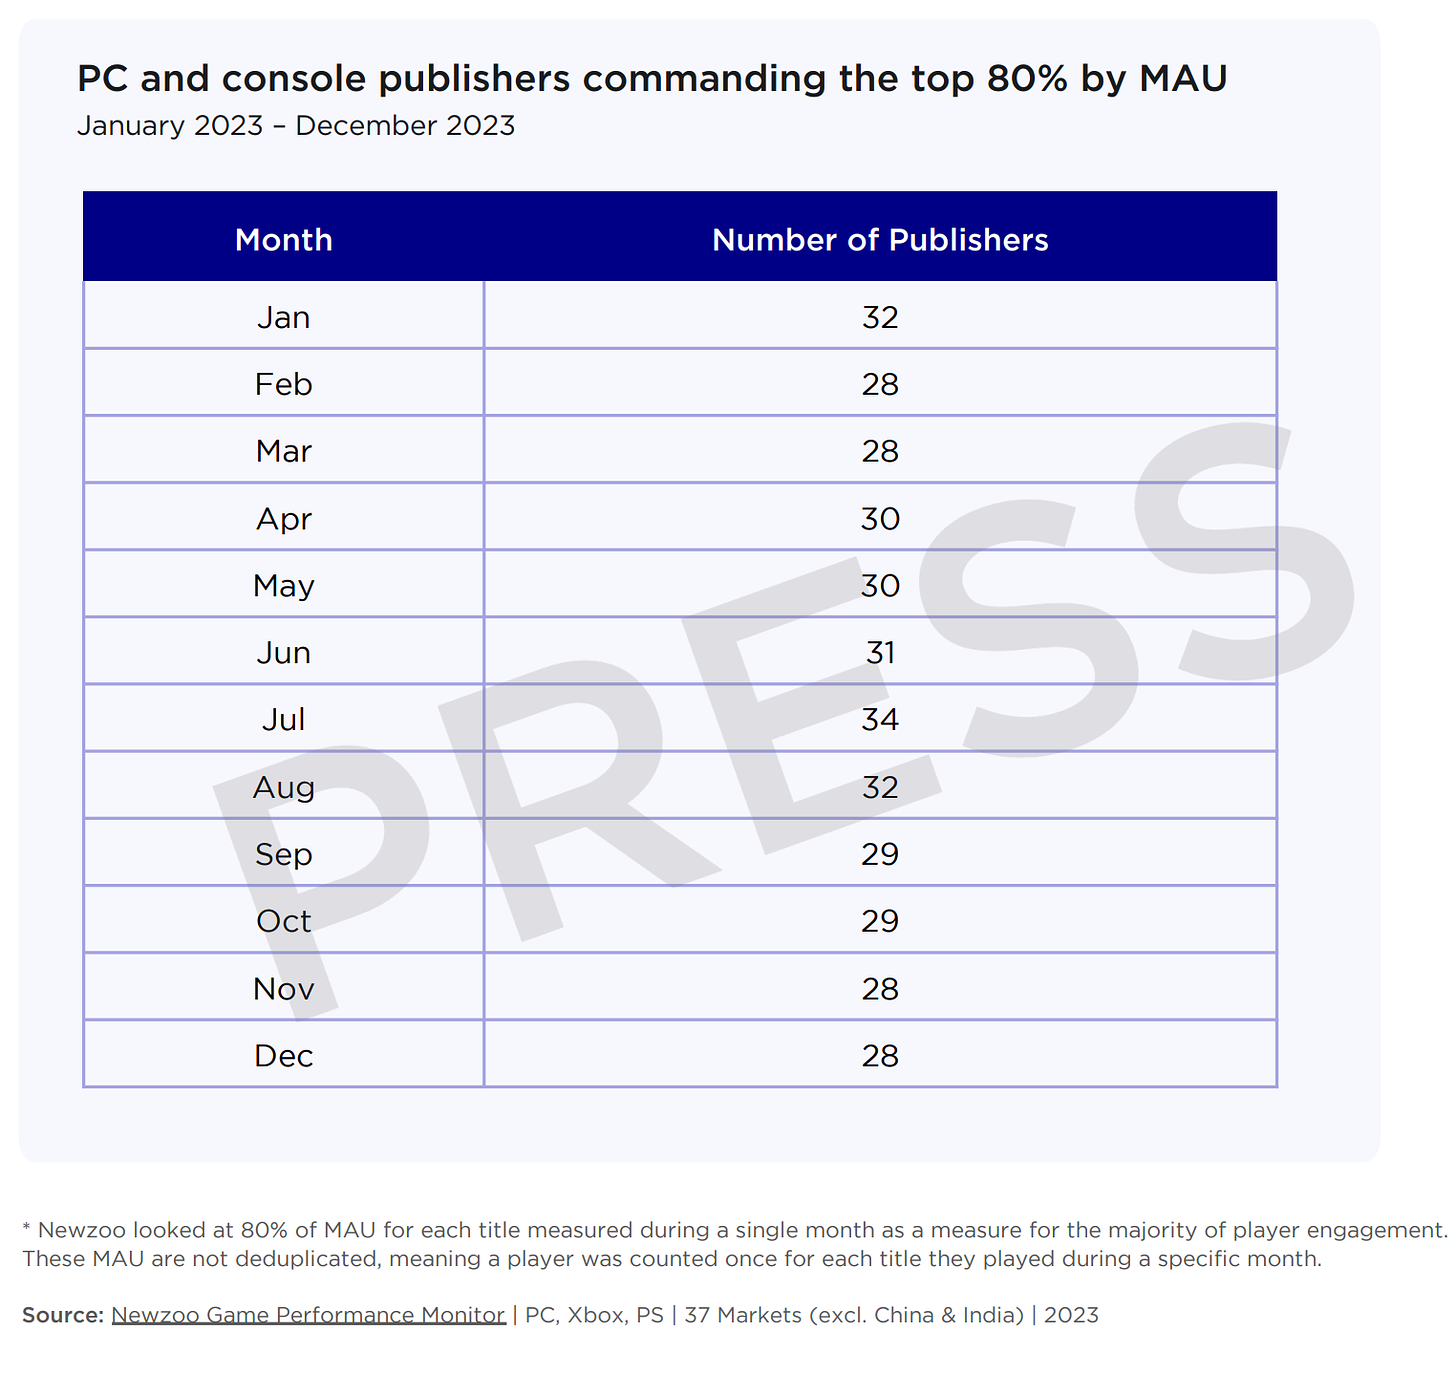 18 PC and console publishers the top 80% by MAU